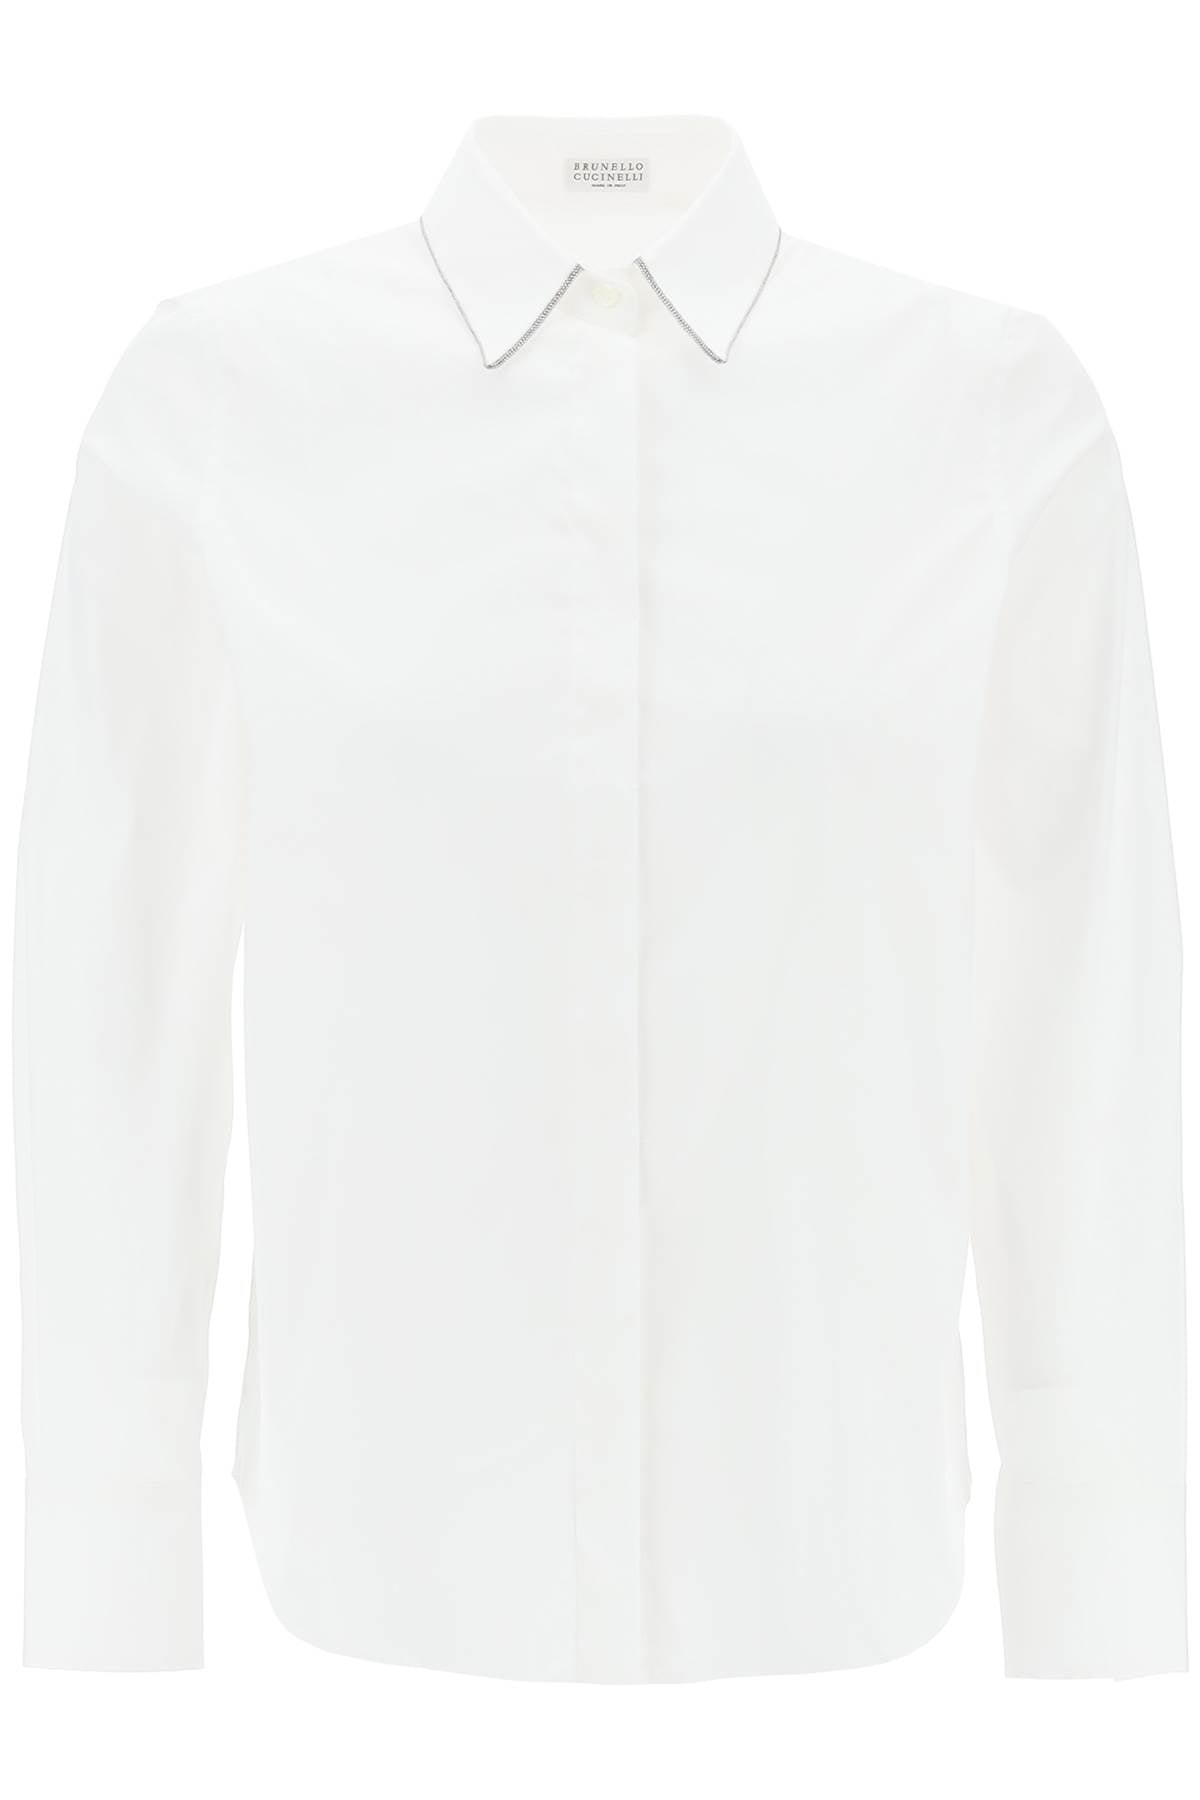 Brunello cucinelli "shirt with shiny-0